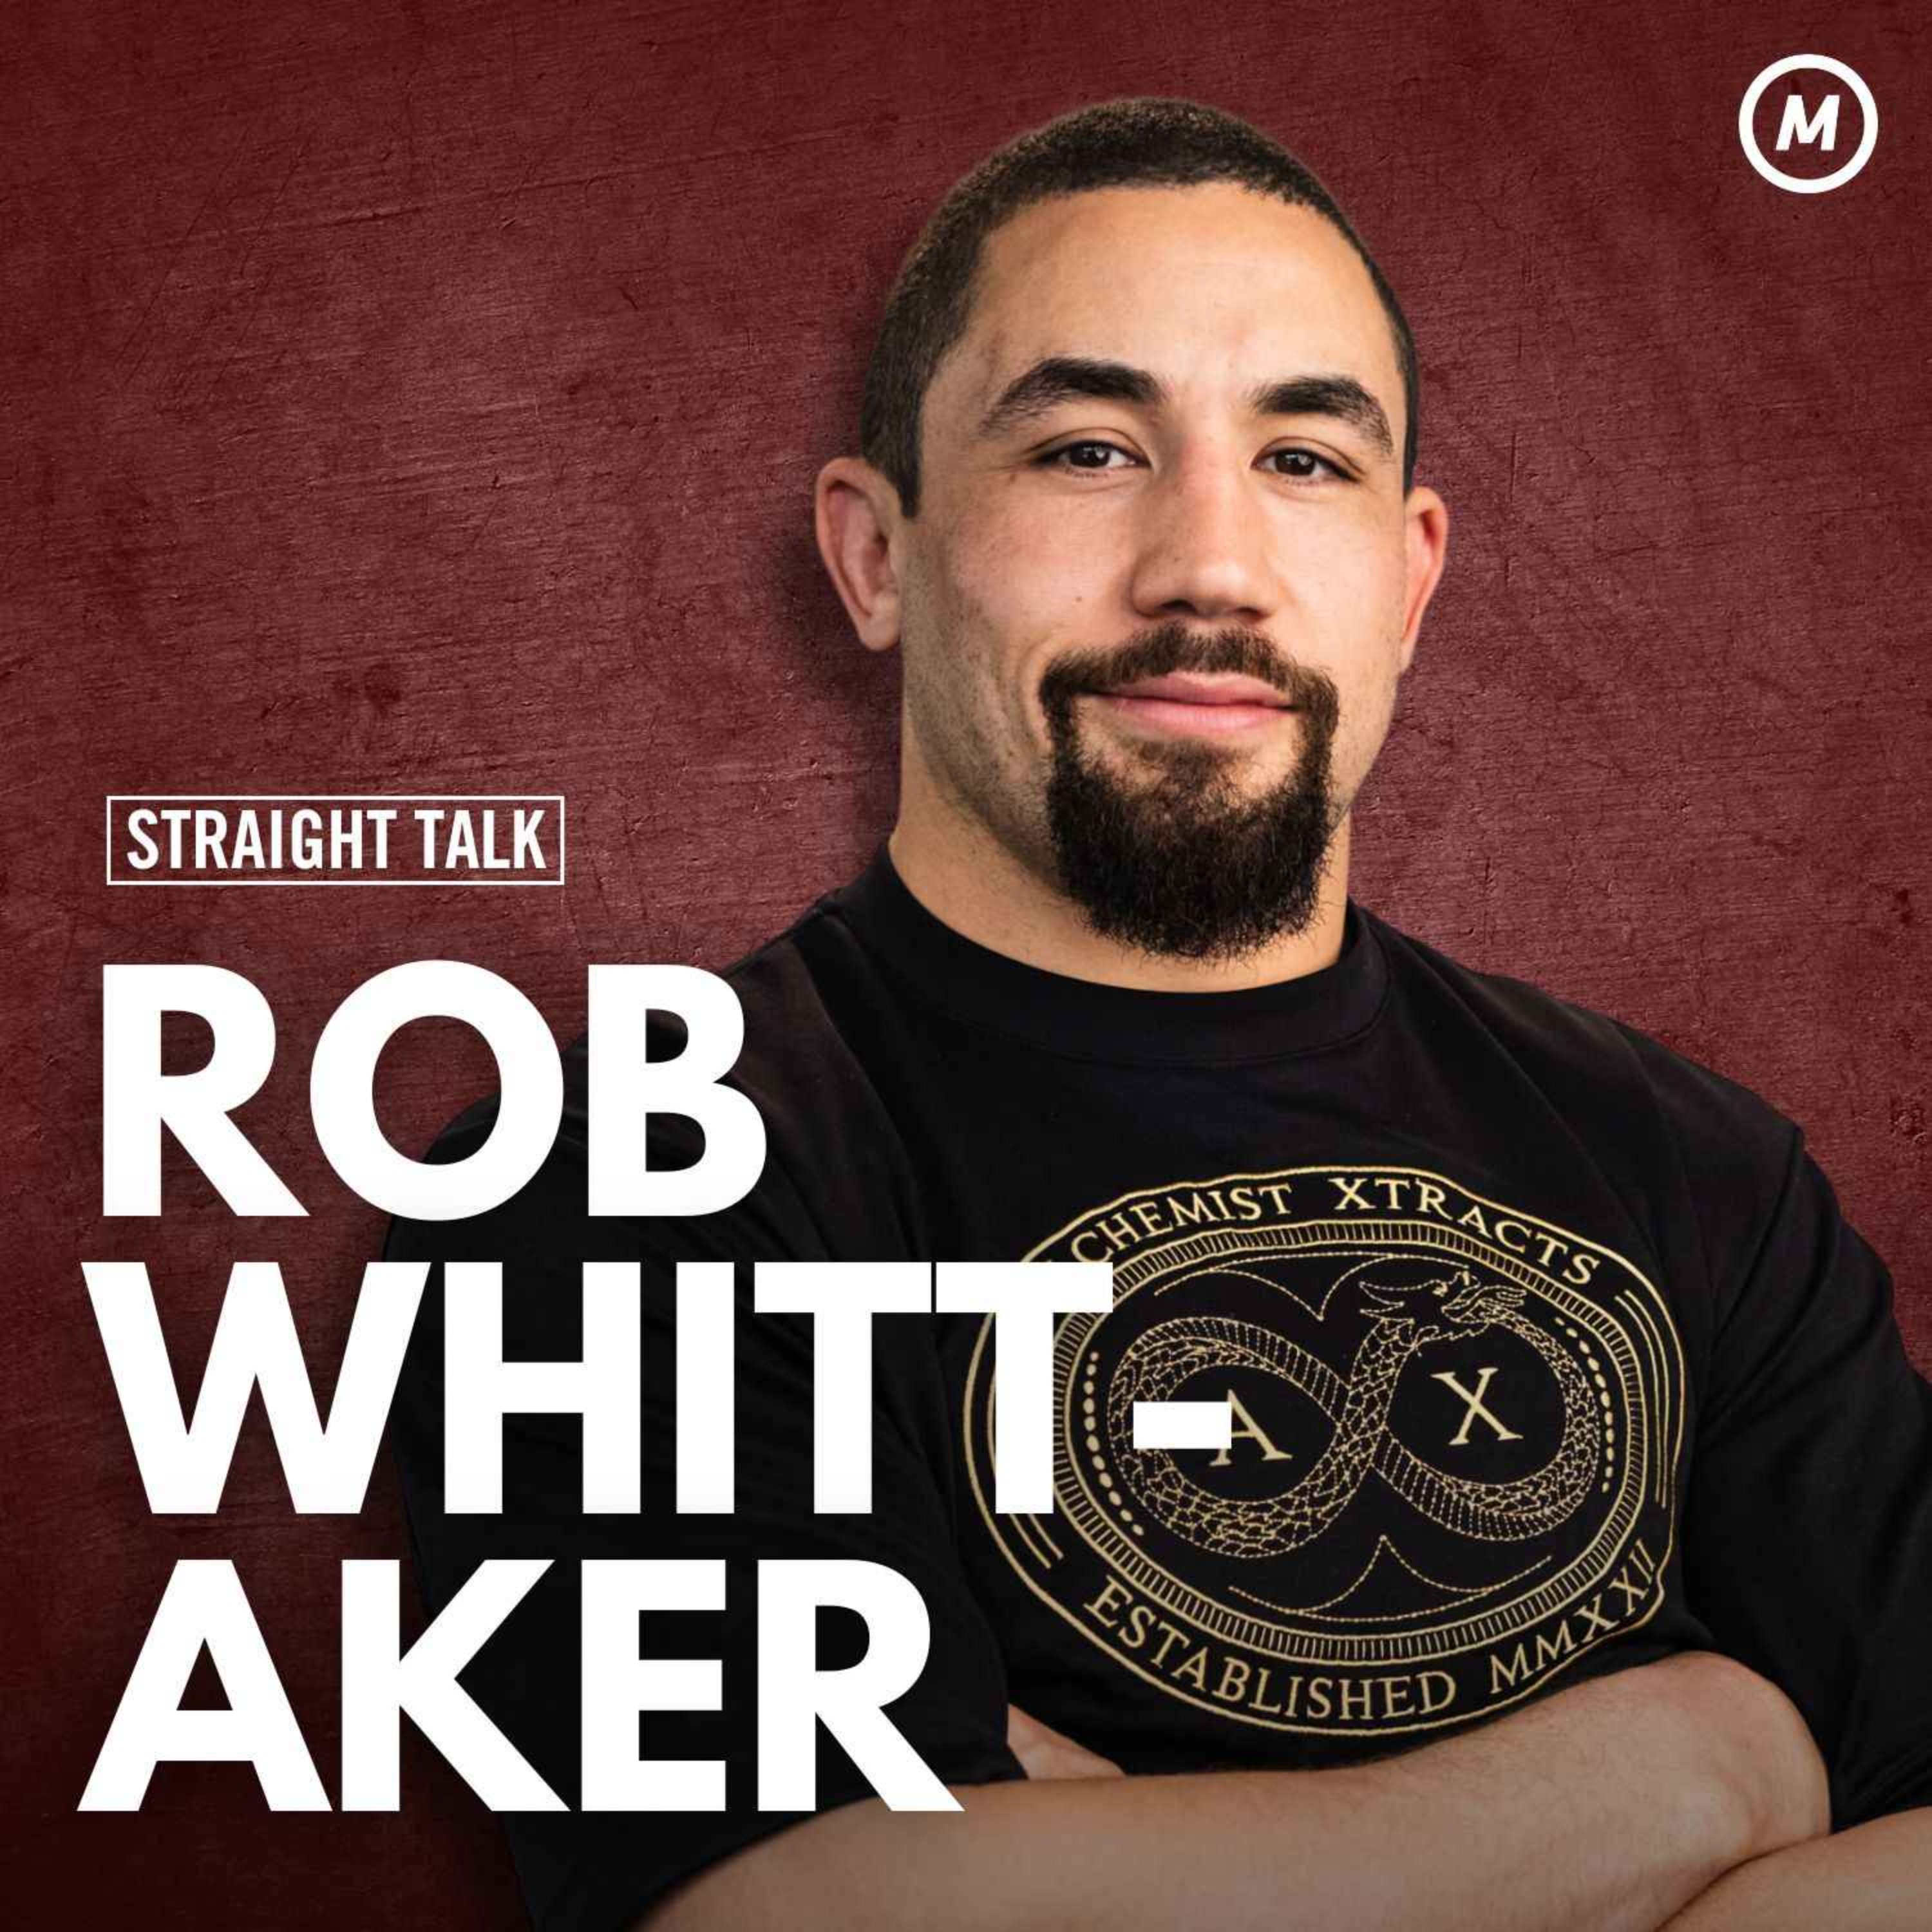 #102 'I get a high from avoiding the threat' Rob Whittaker on his hunger to fight